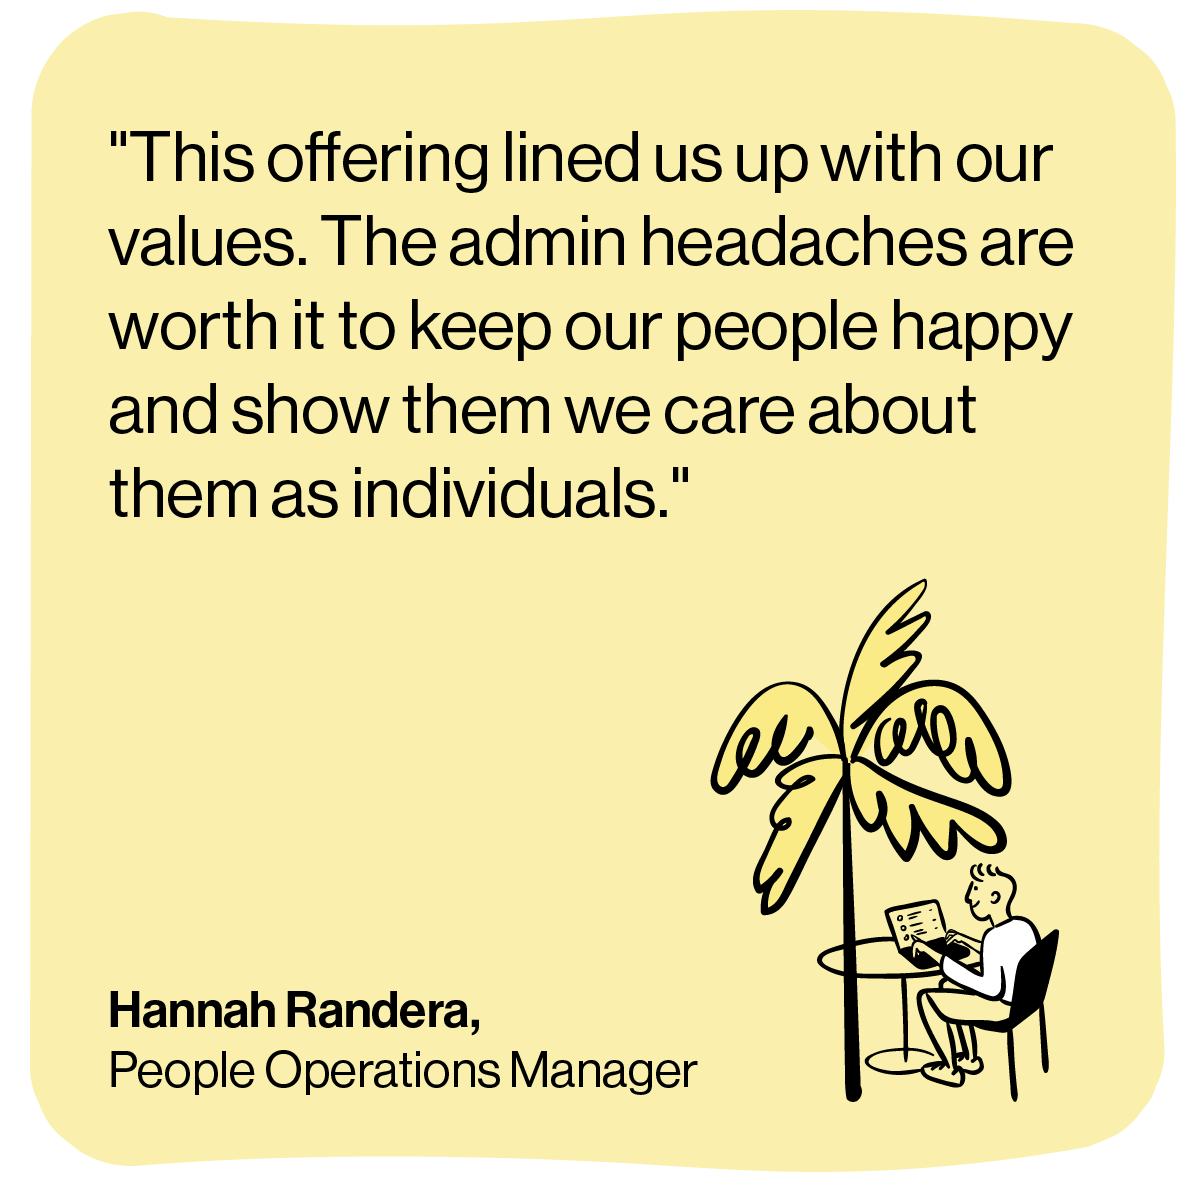 Quote from Hannah "This offering lined us up with our values. The admin headaches are worth it to keep our people happy and show them we care about them as individuals"